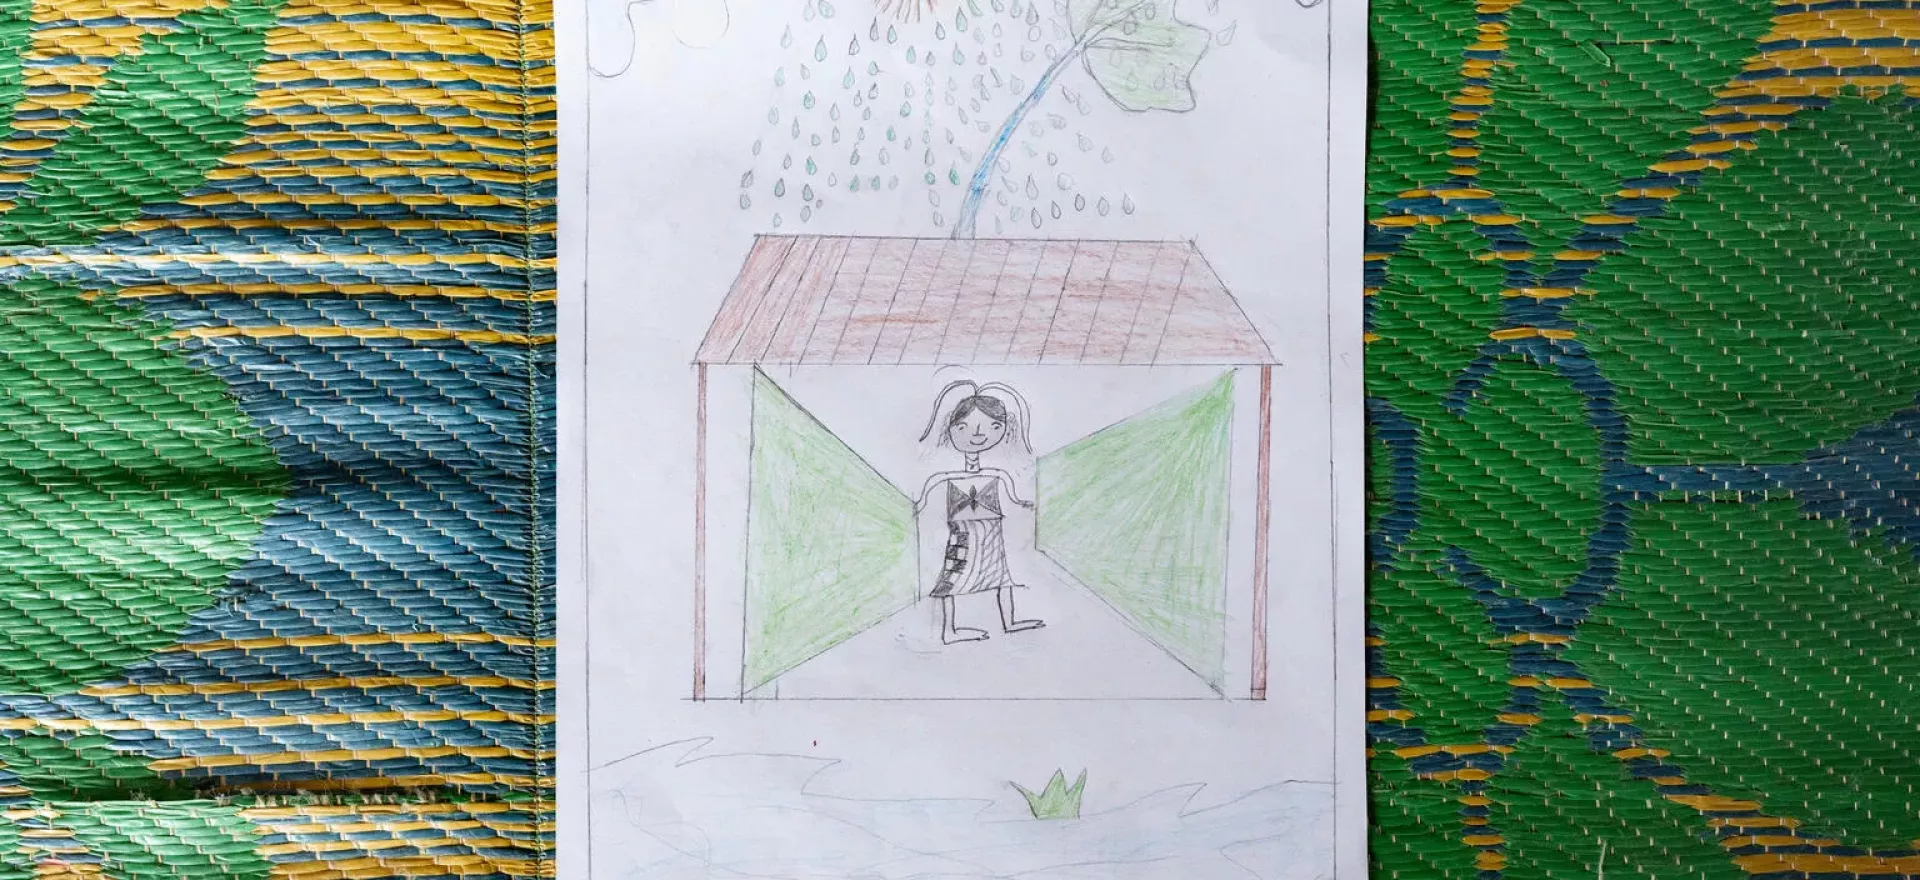 Bangladesh. A child’s drawing on the theme of “What do you want to be when you grow up?” is pictured at a Multi-Purpose Centre in a Rohingya refugee camp in Cox’s Bazar.